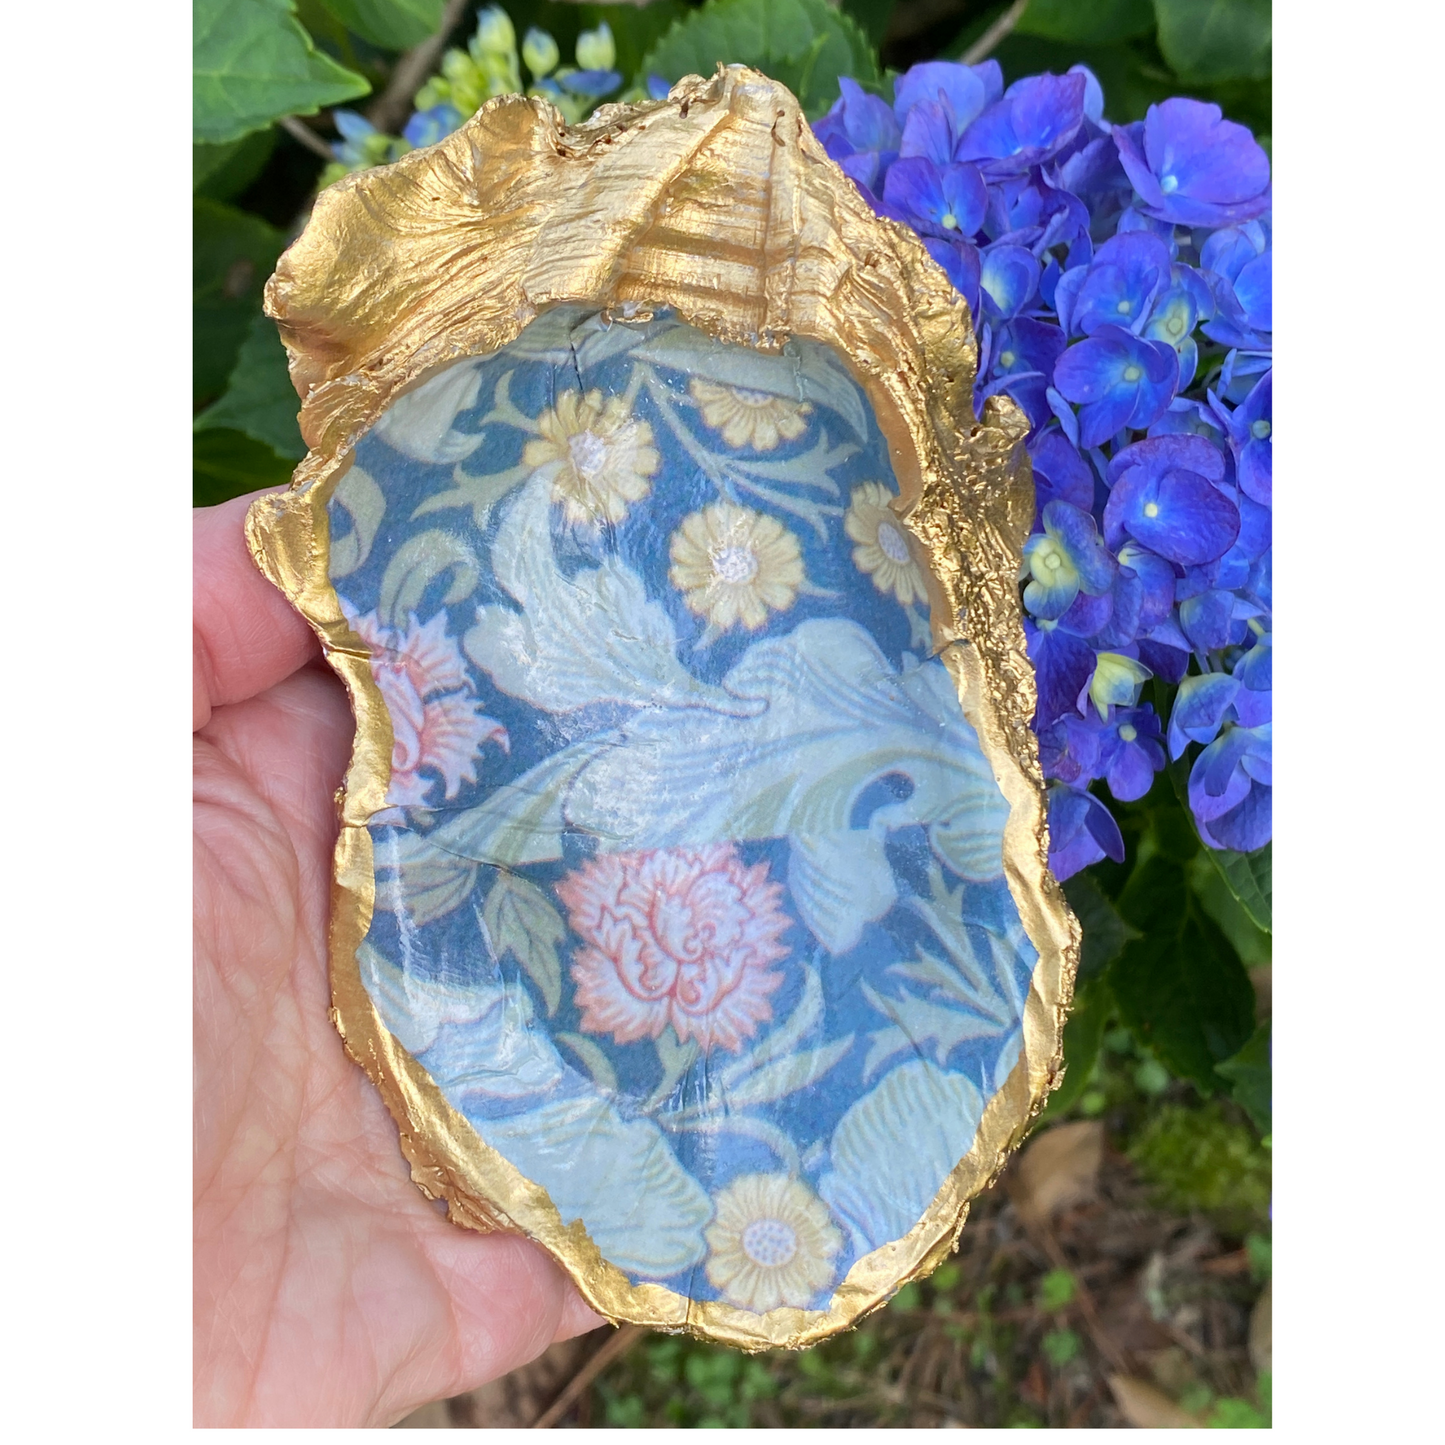 Oyster Shell Art, Vintage William Morris Design, Blue with Flowers, Handcrafted Home Decor